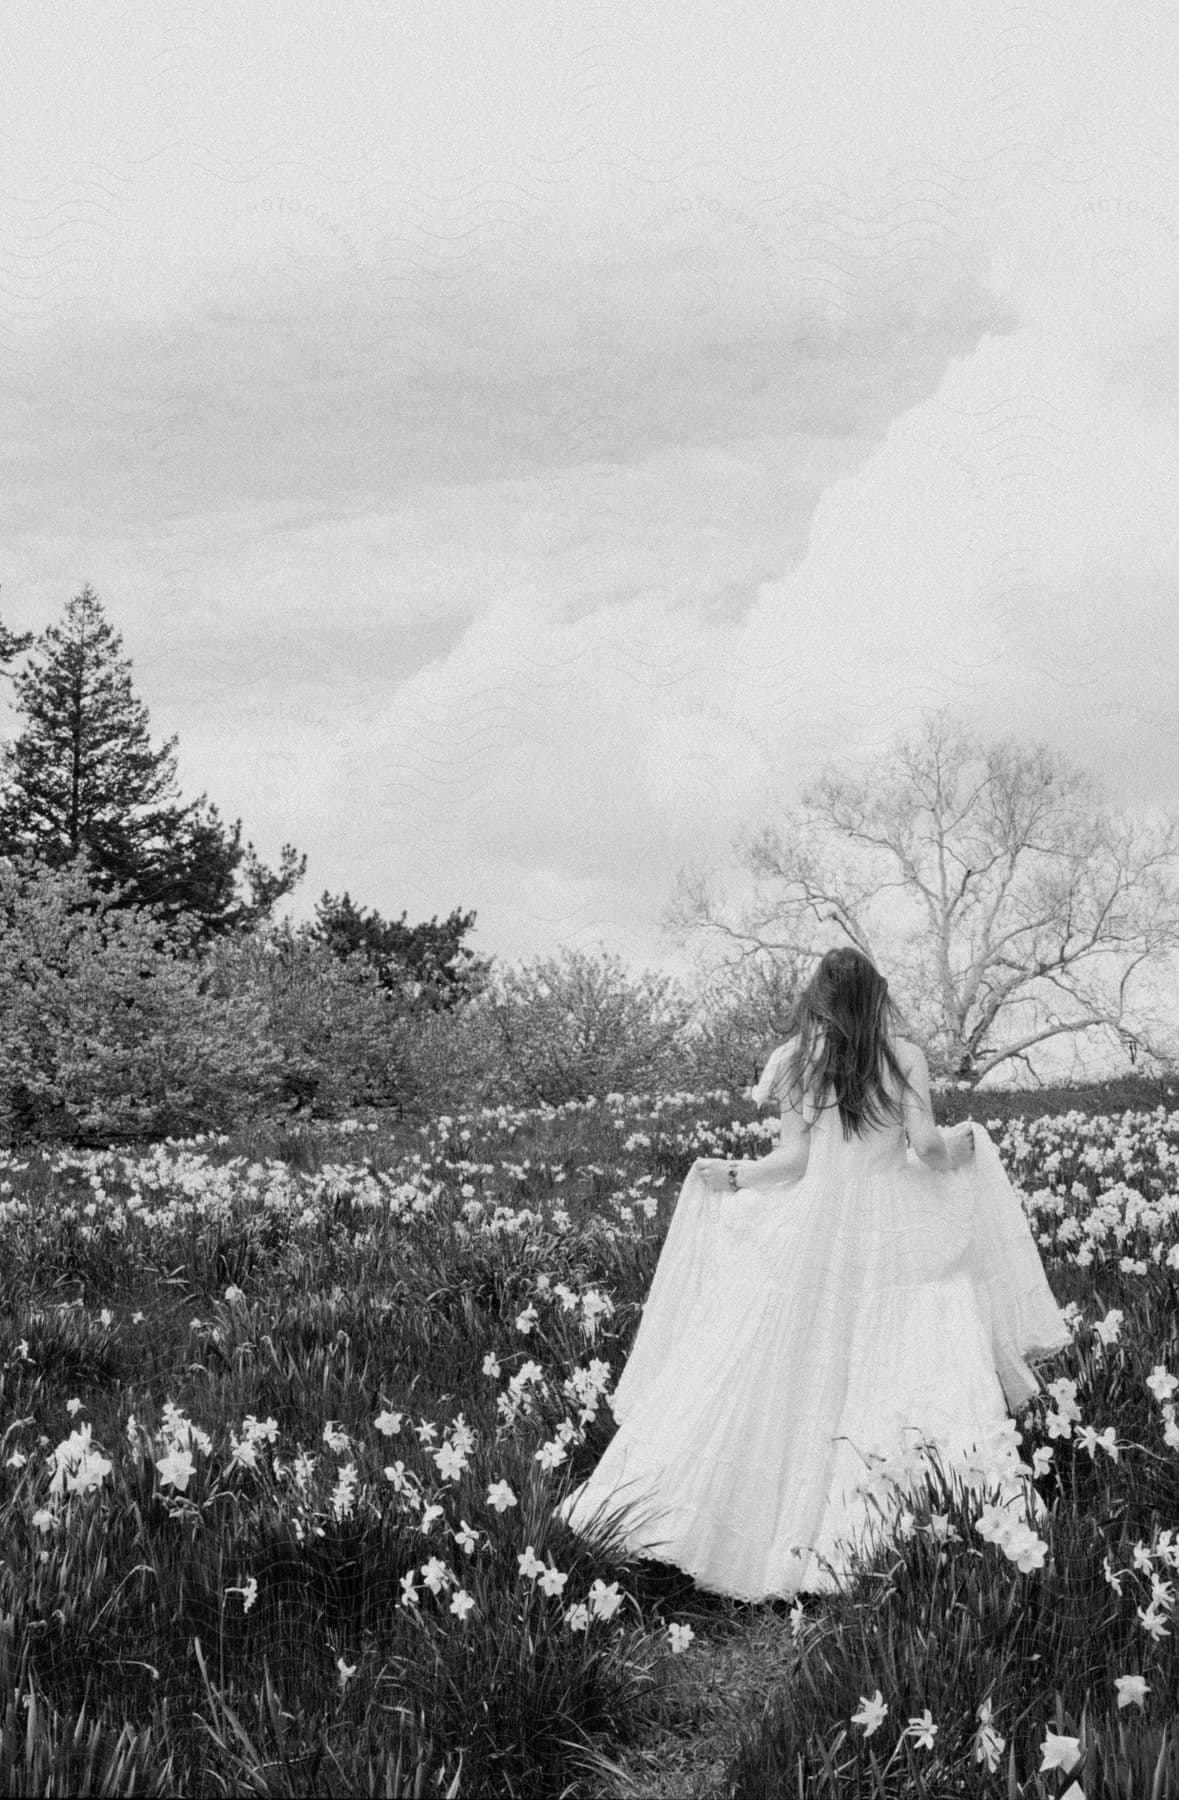 Woman from behind wearing a long dress and walking through a flower field.